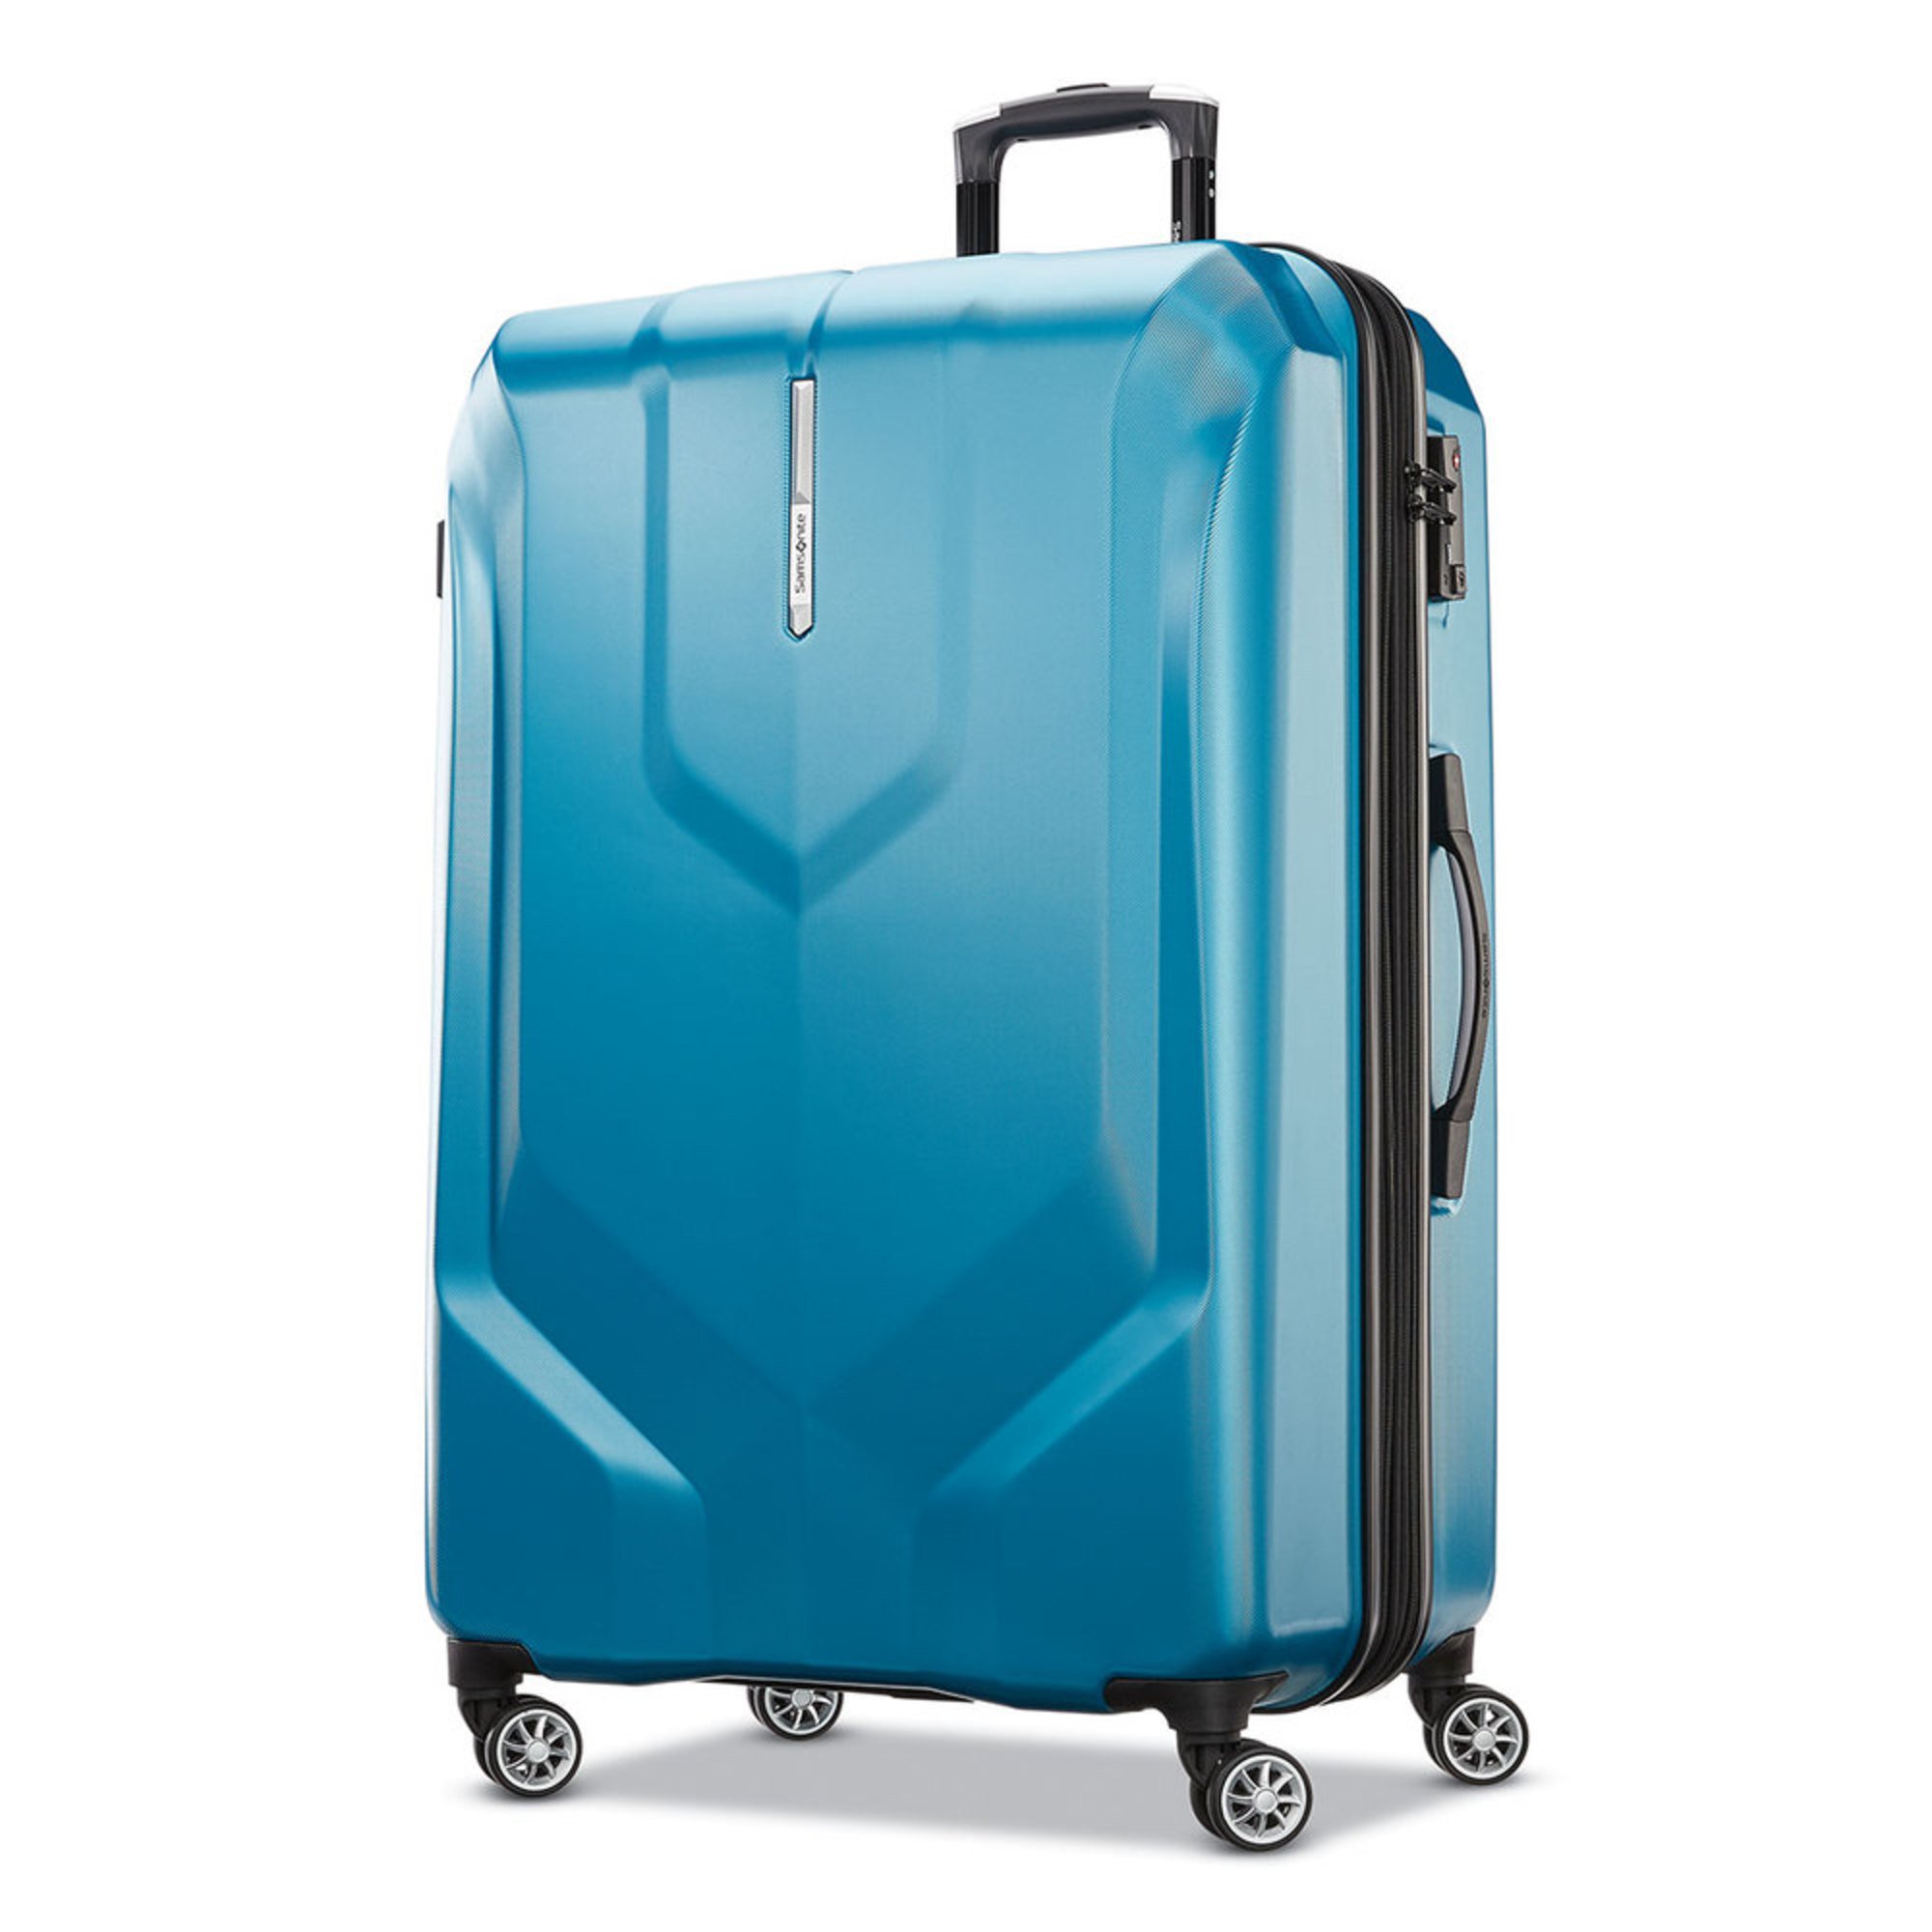 lightest weight luggage 29 inch